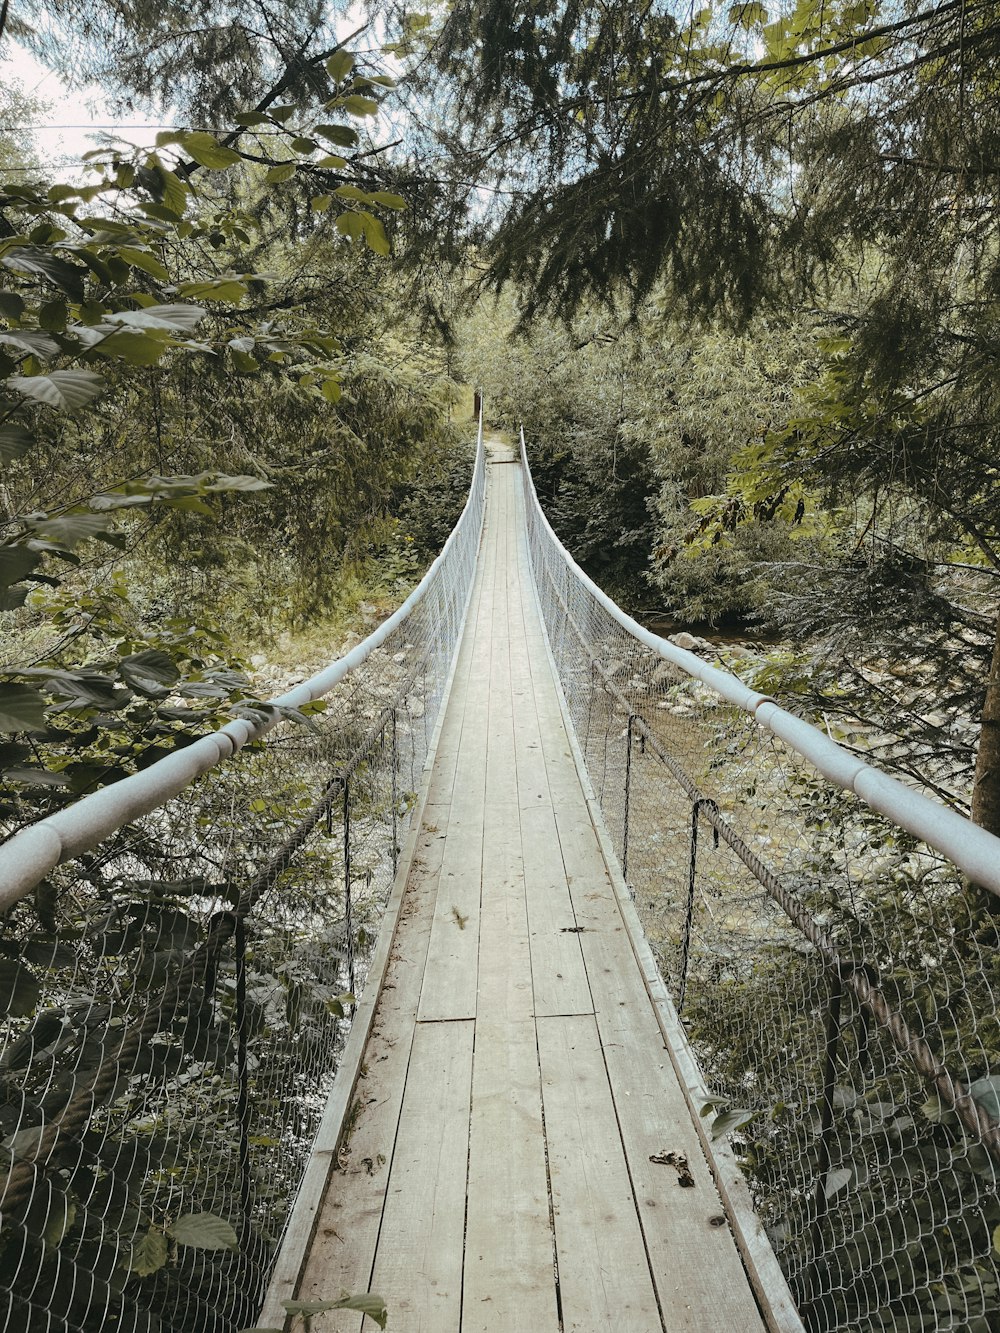 a wooden suspension bridge over a stream in a forest